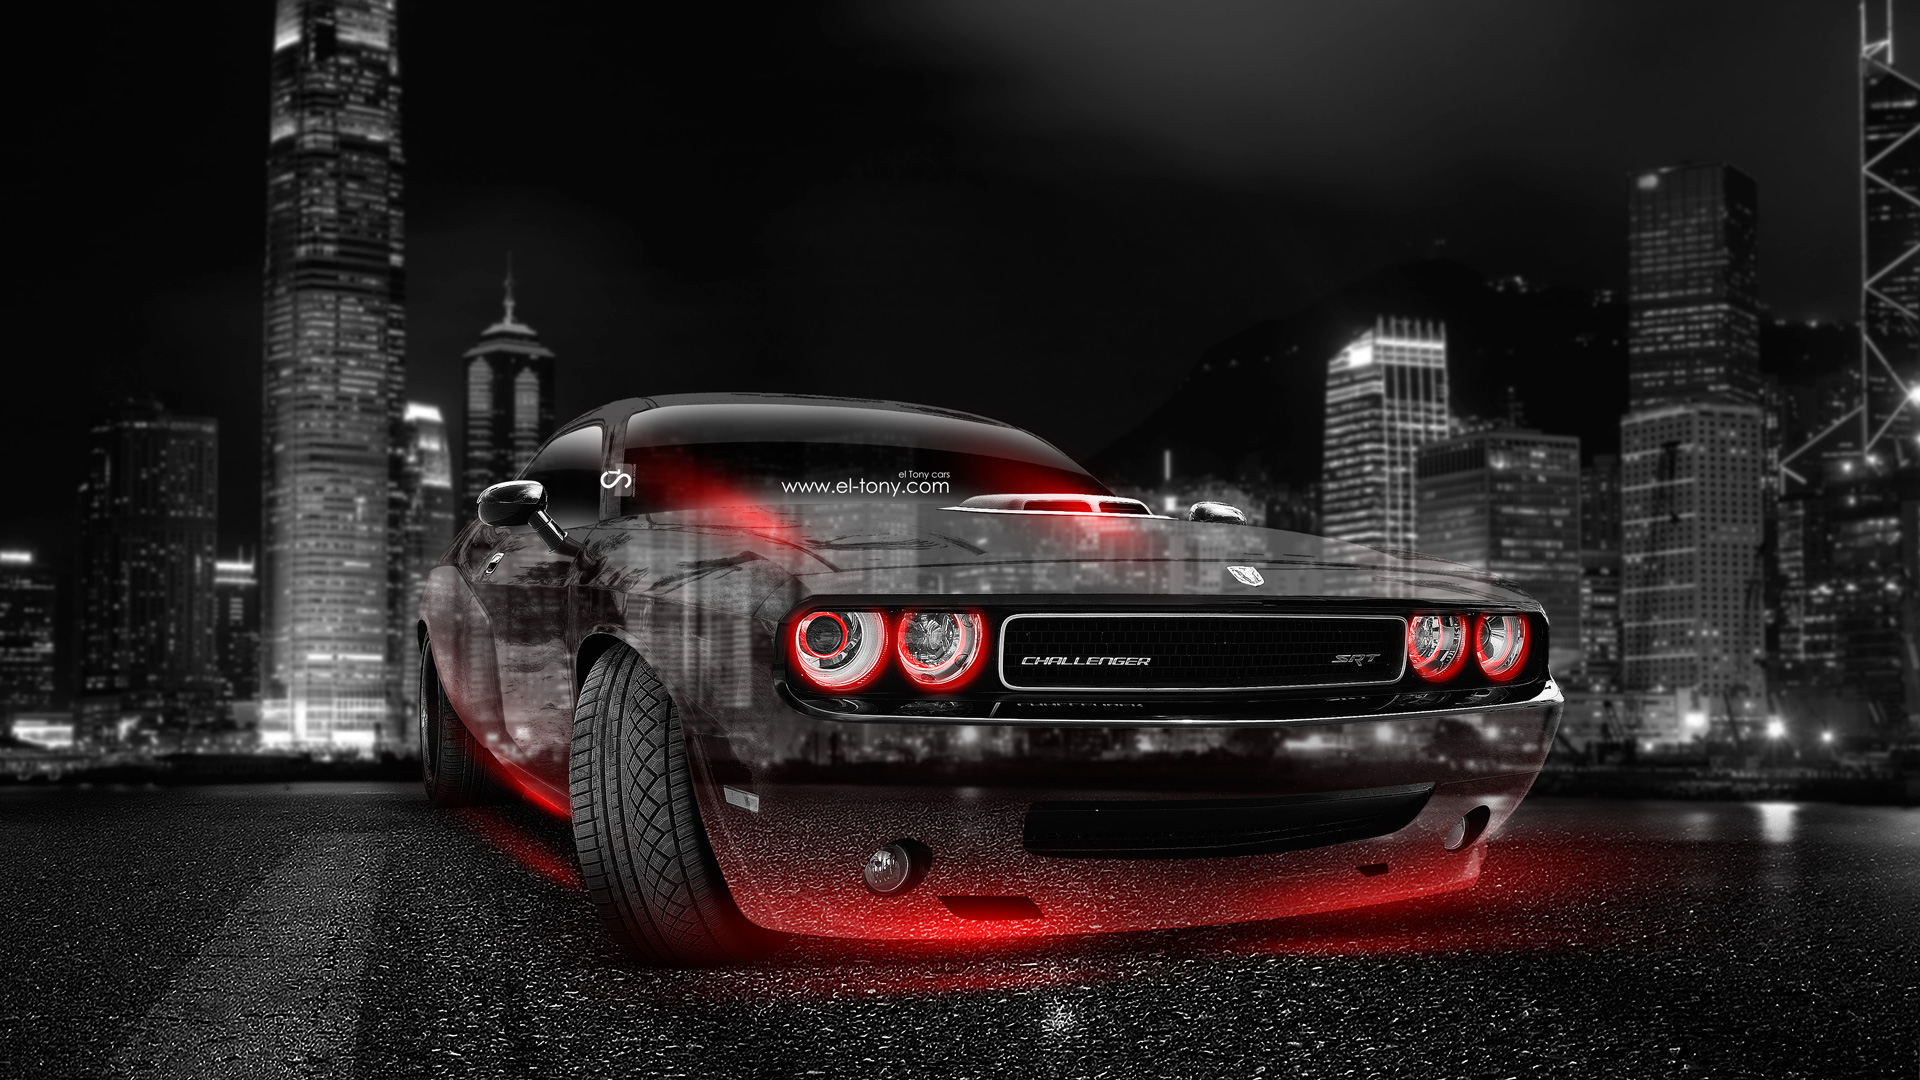 Free download Challenger Wallpaper Image Group 38 [1920x1080] for your